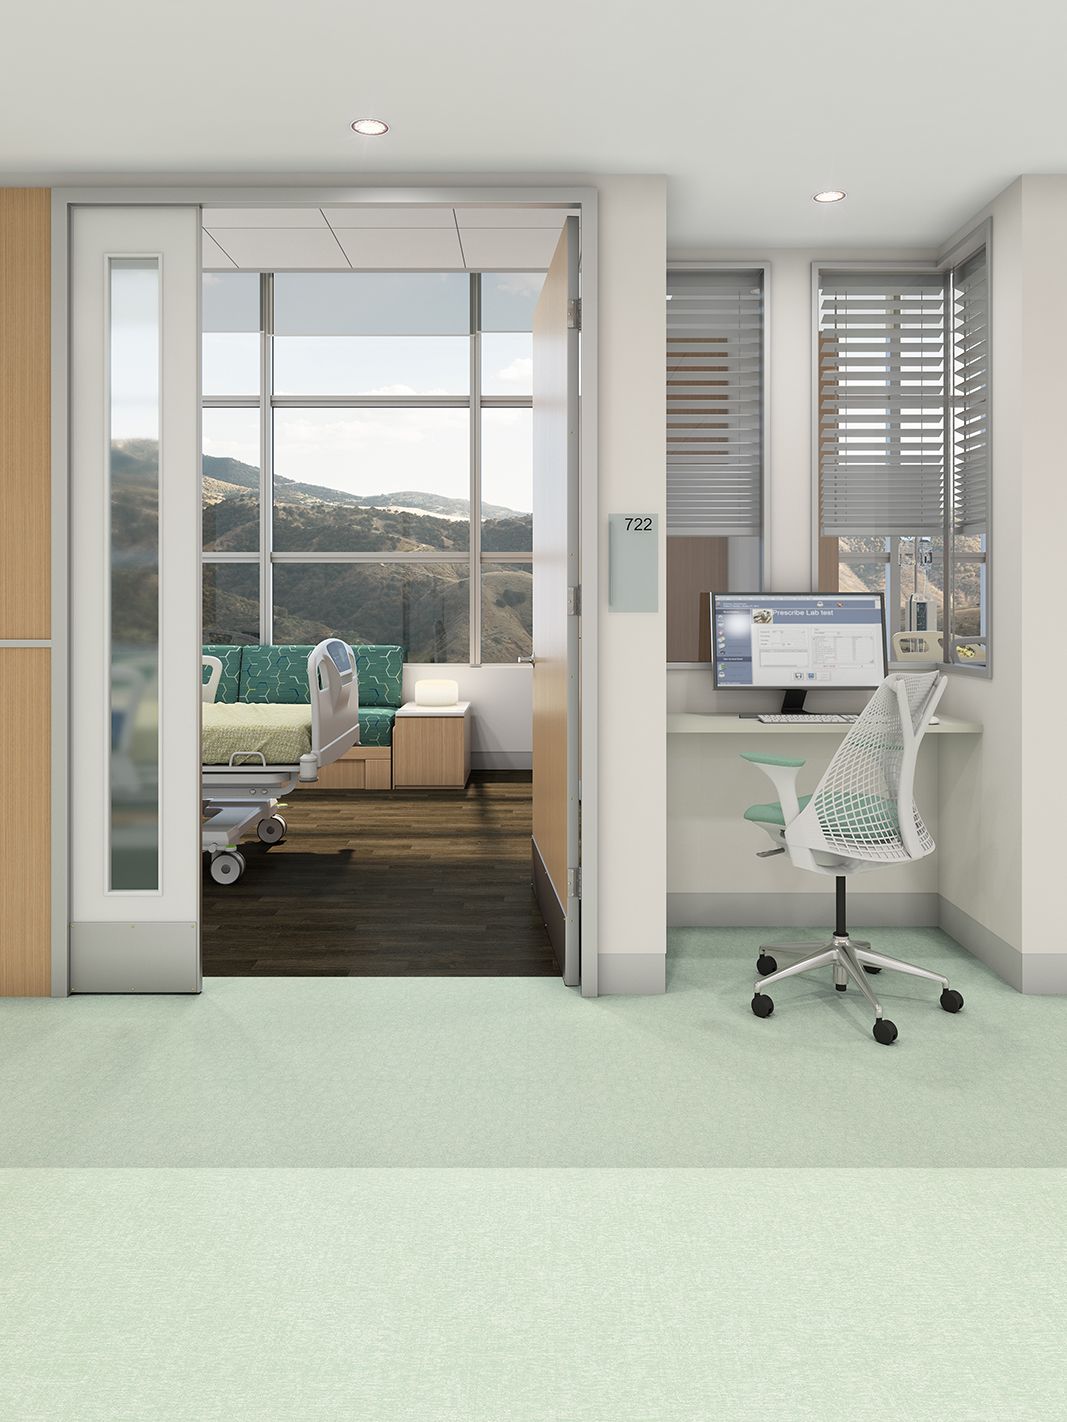 Interface's Spike-tacular, Bloom with a View and Continual Woodgrains vinyl sheet in hospital corridor and patient room imagen número 9